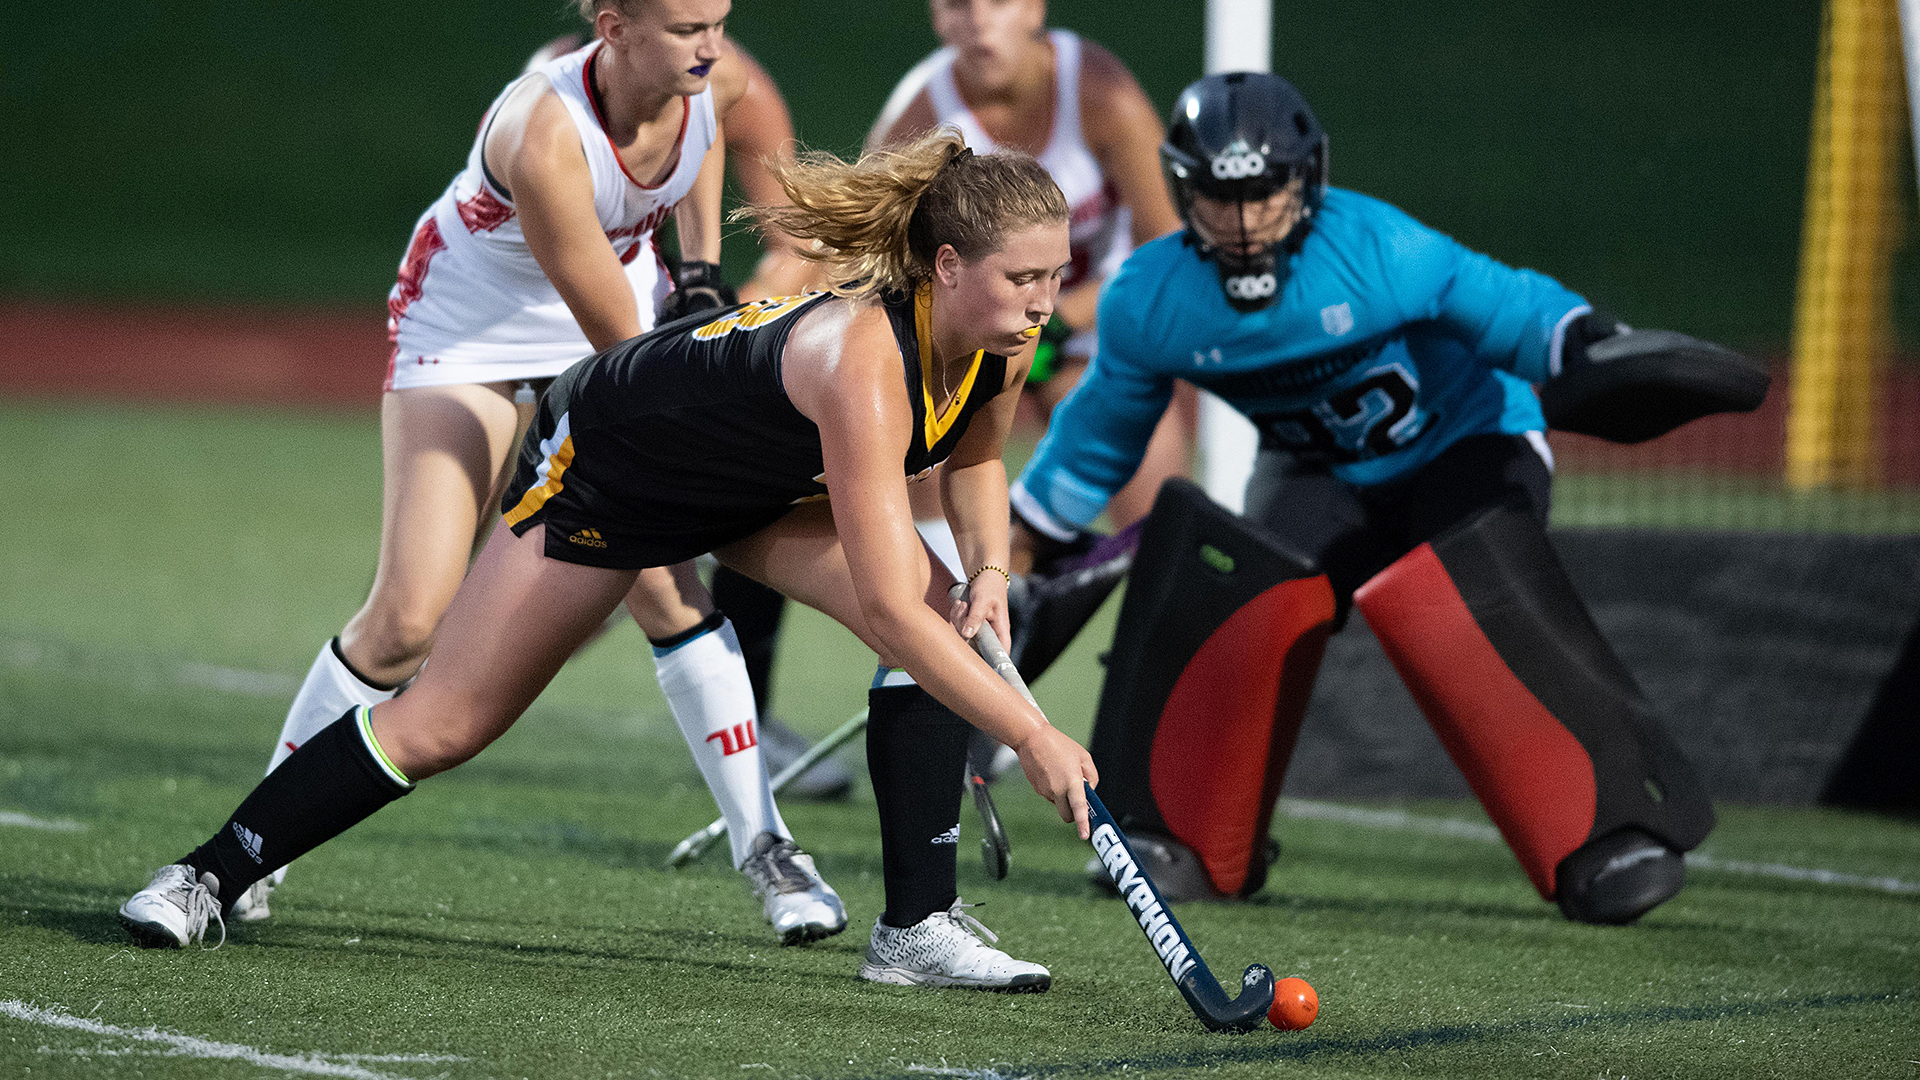 Ciara O'Connor College of Wooster field hockey